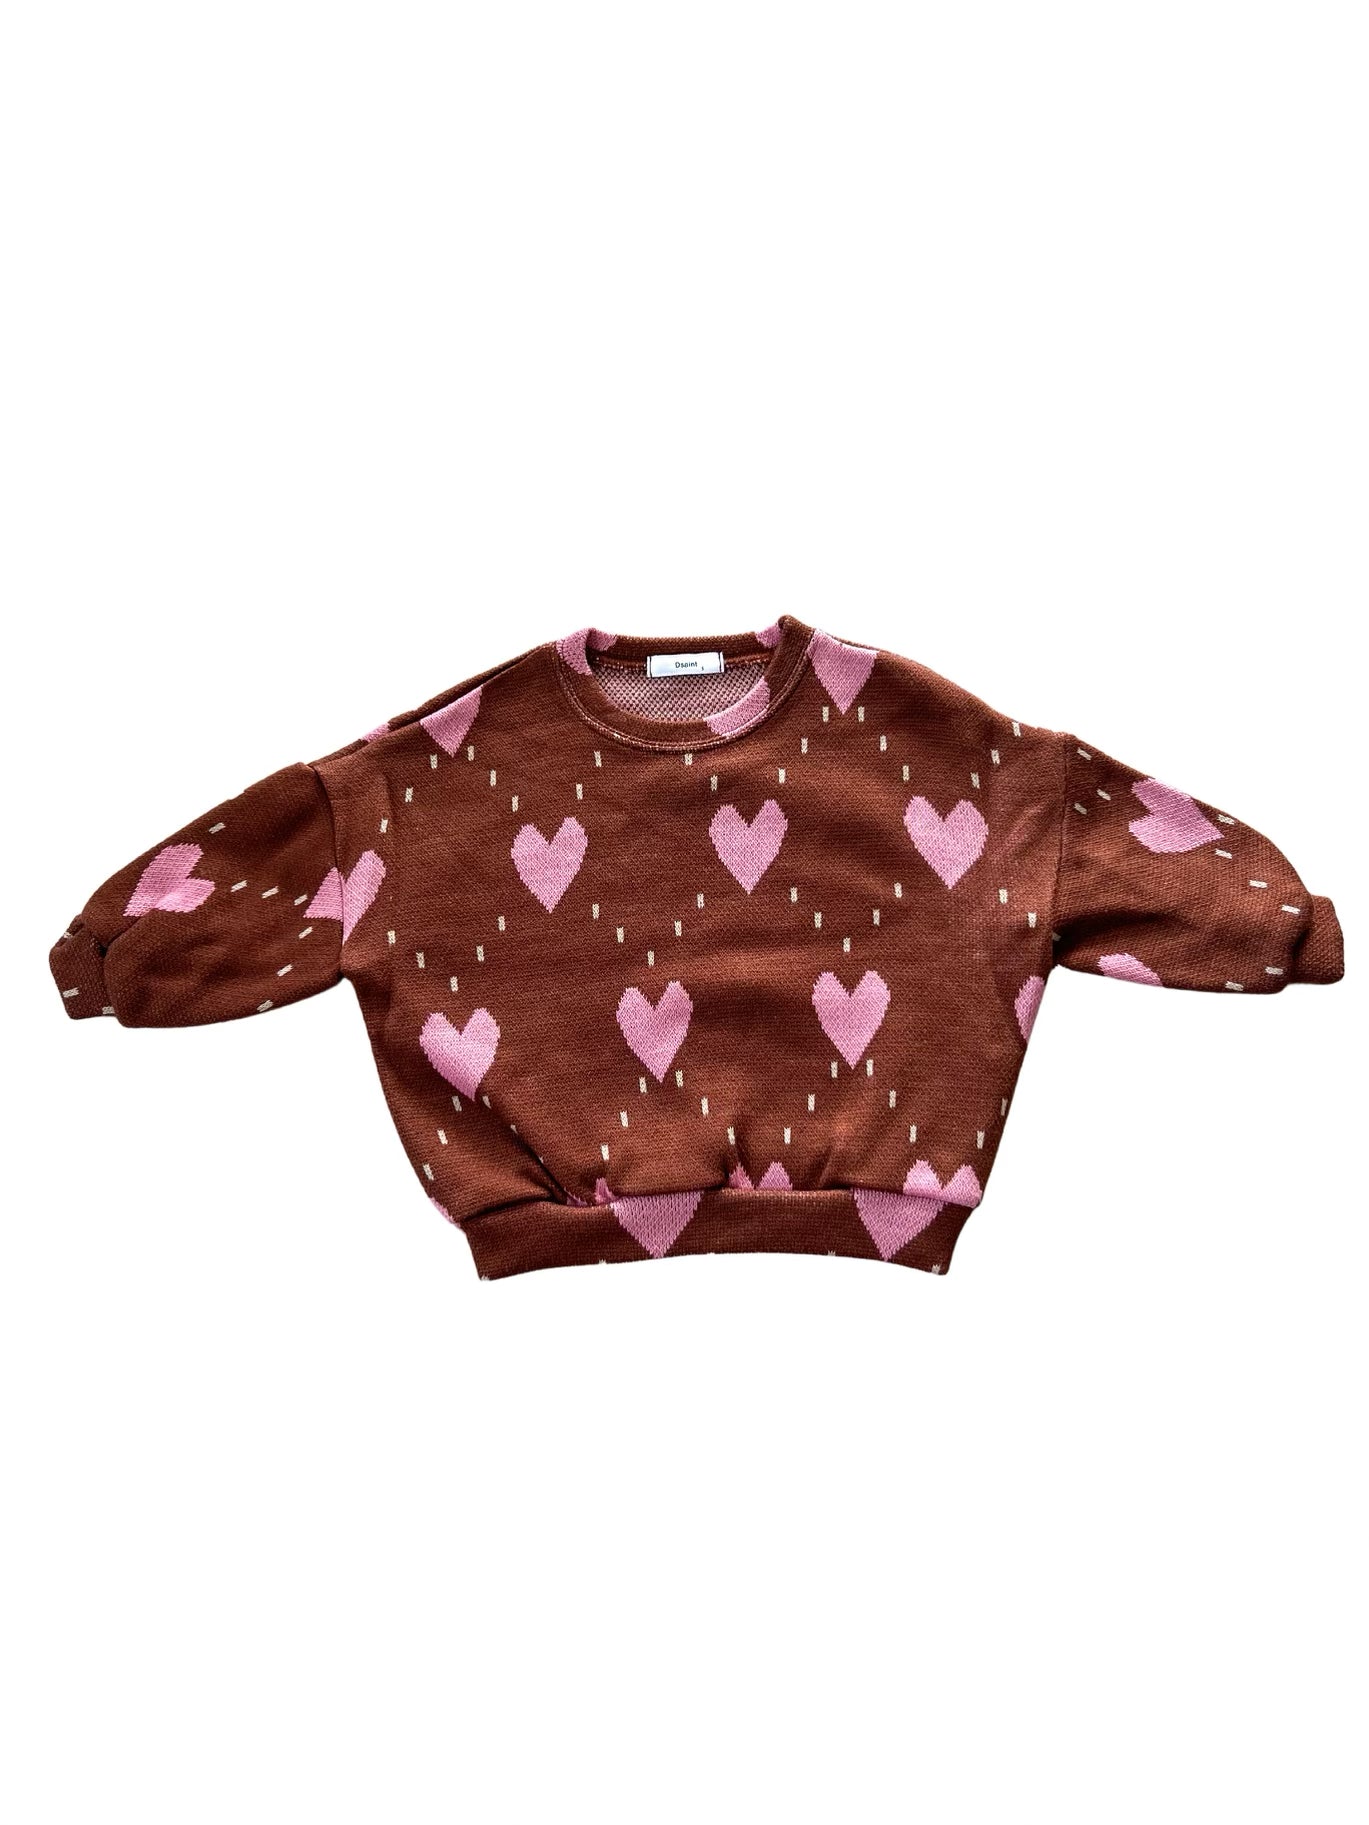 Assorted Heart Knit Sweater - In Store